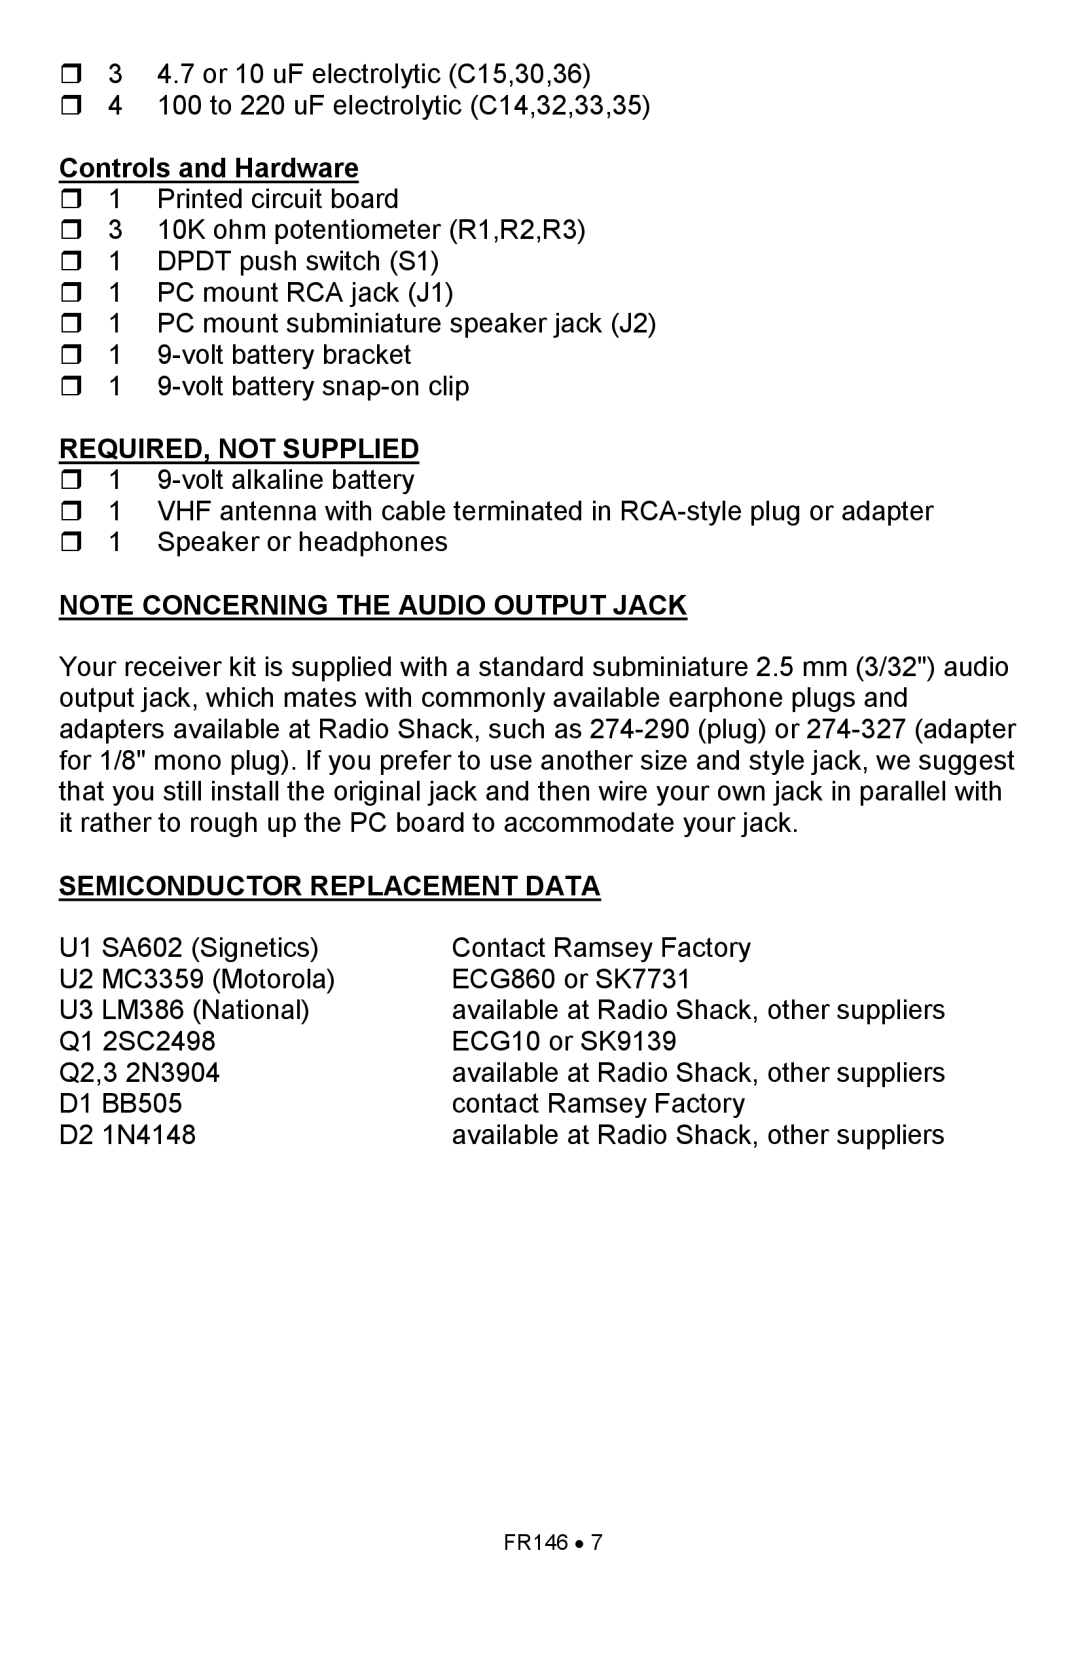 Ramsey Electronics FR146 manual Controls and Hardware, Required, Not Supplied, Note Concerning The Audio Output Jack 